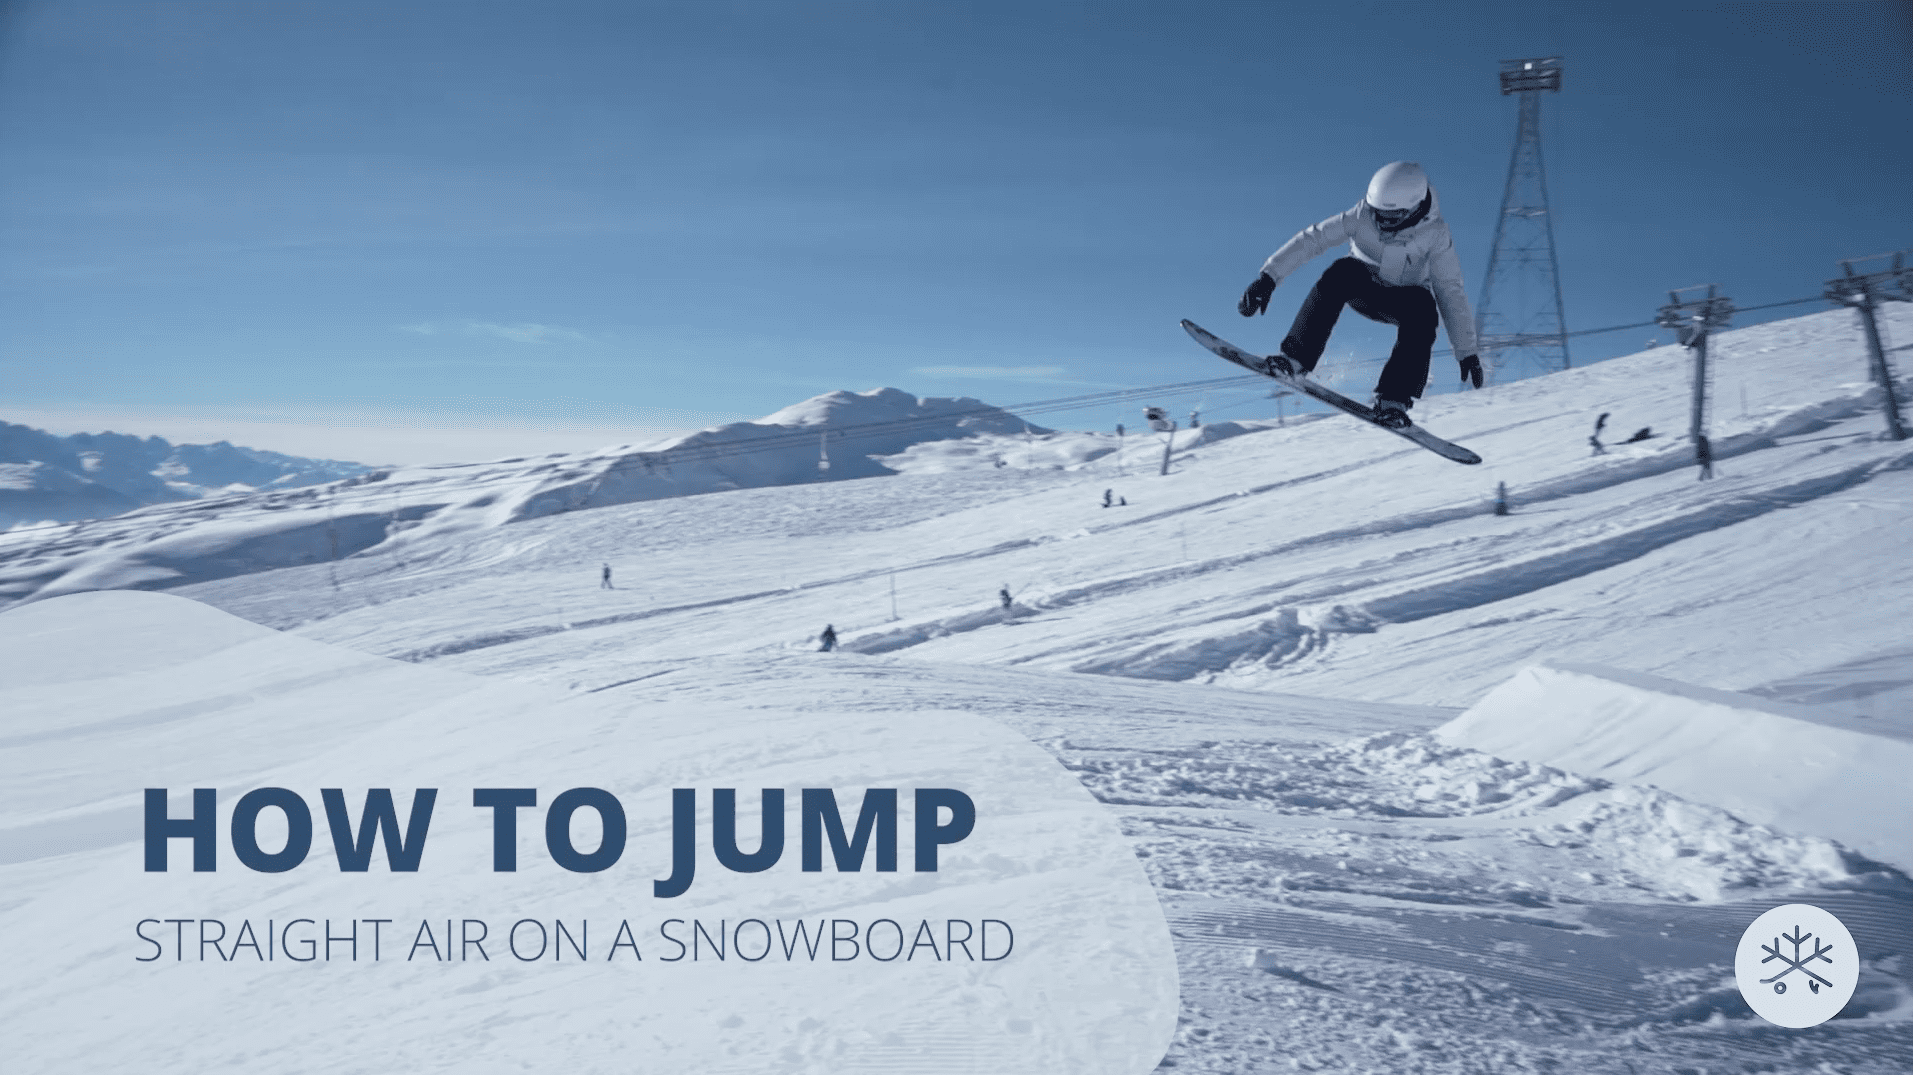 chixxs on board snowboard how to jump